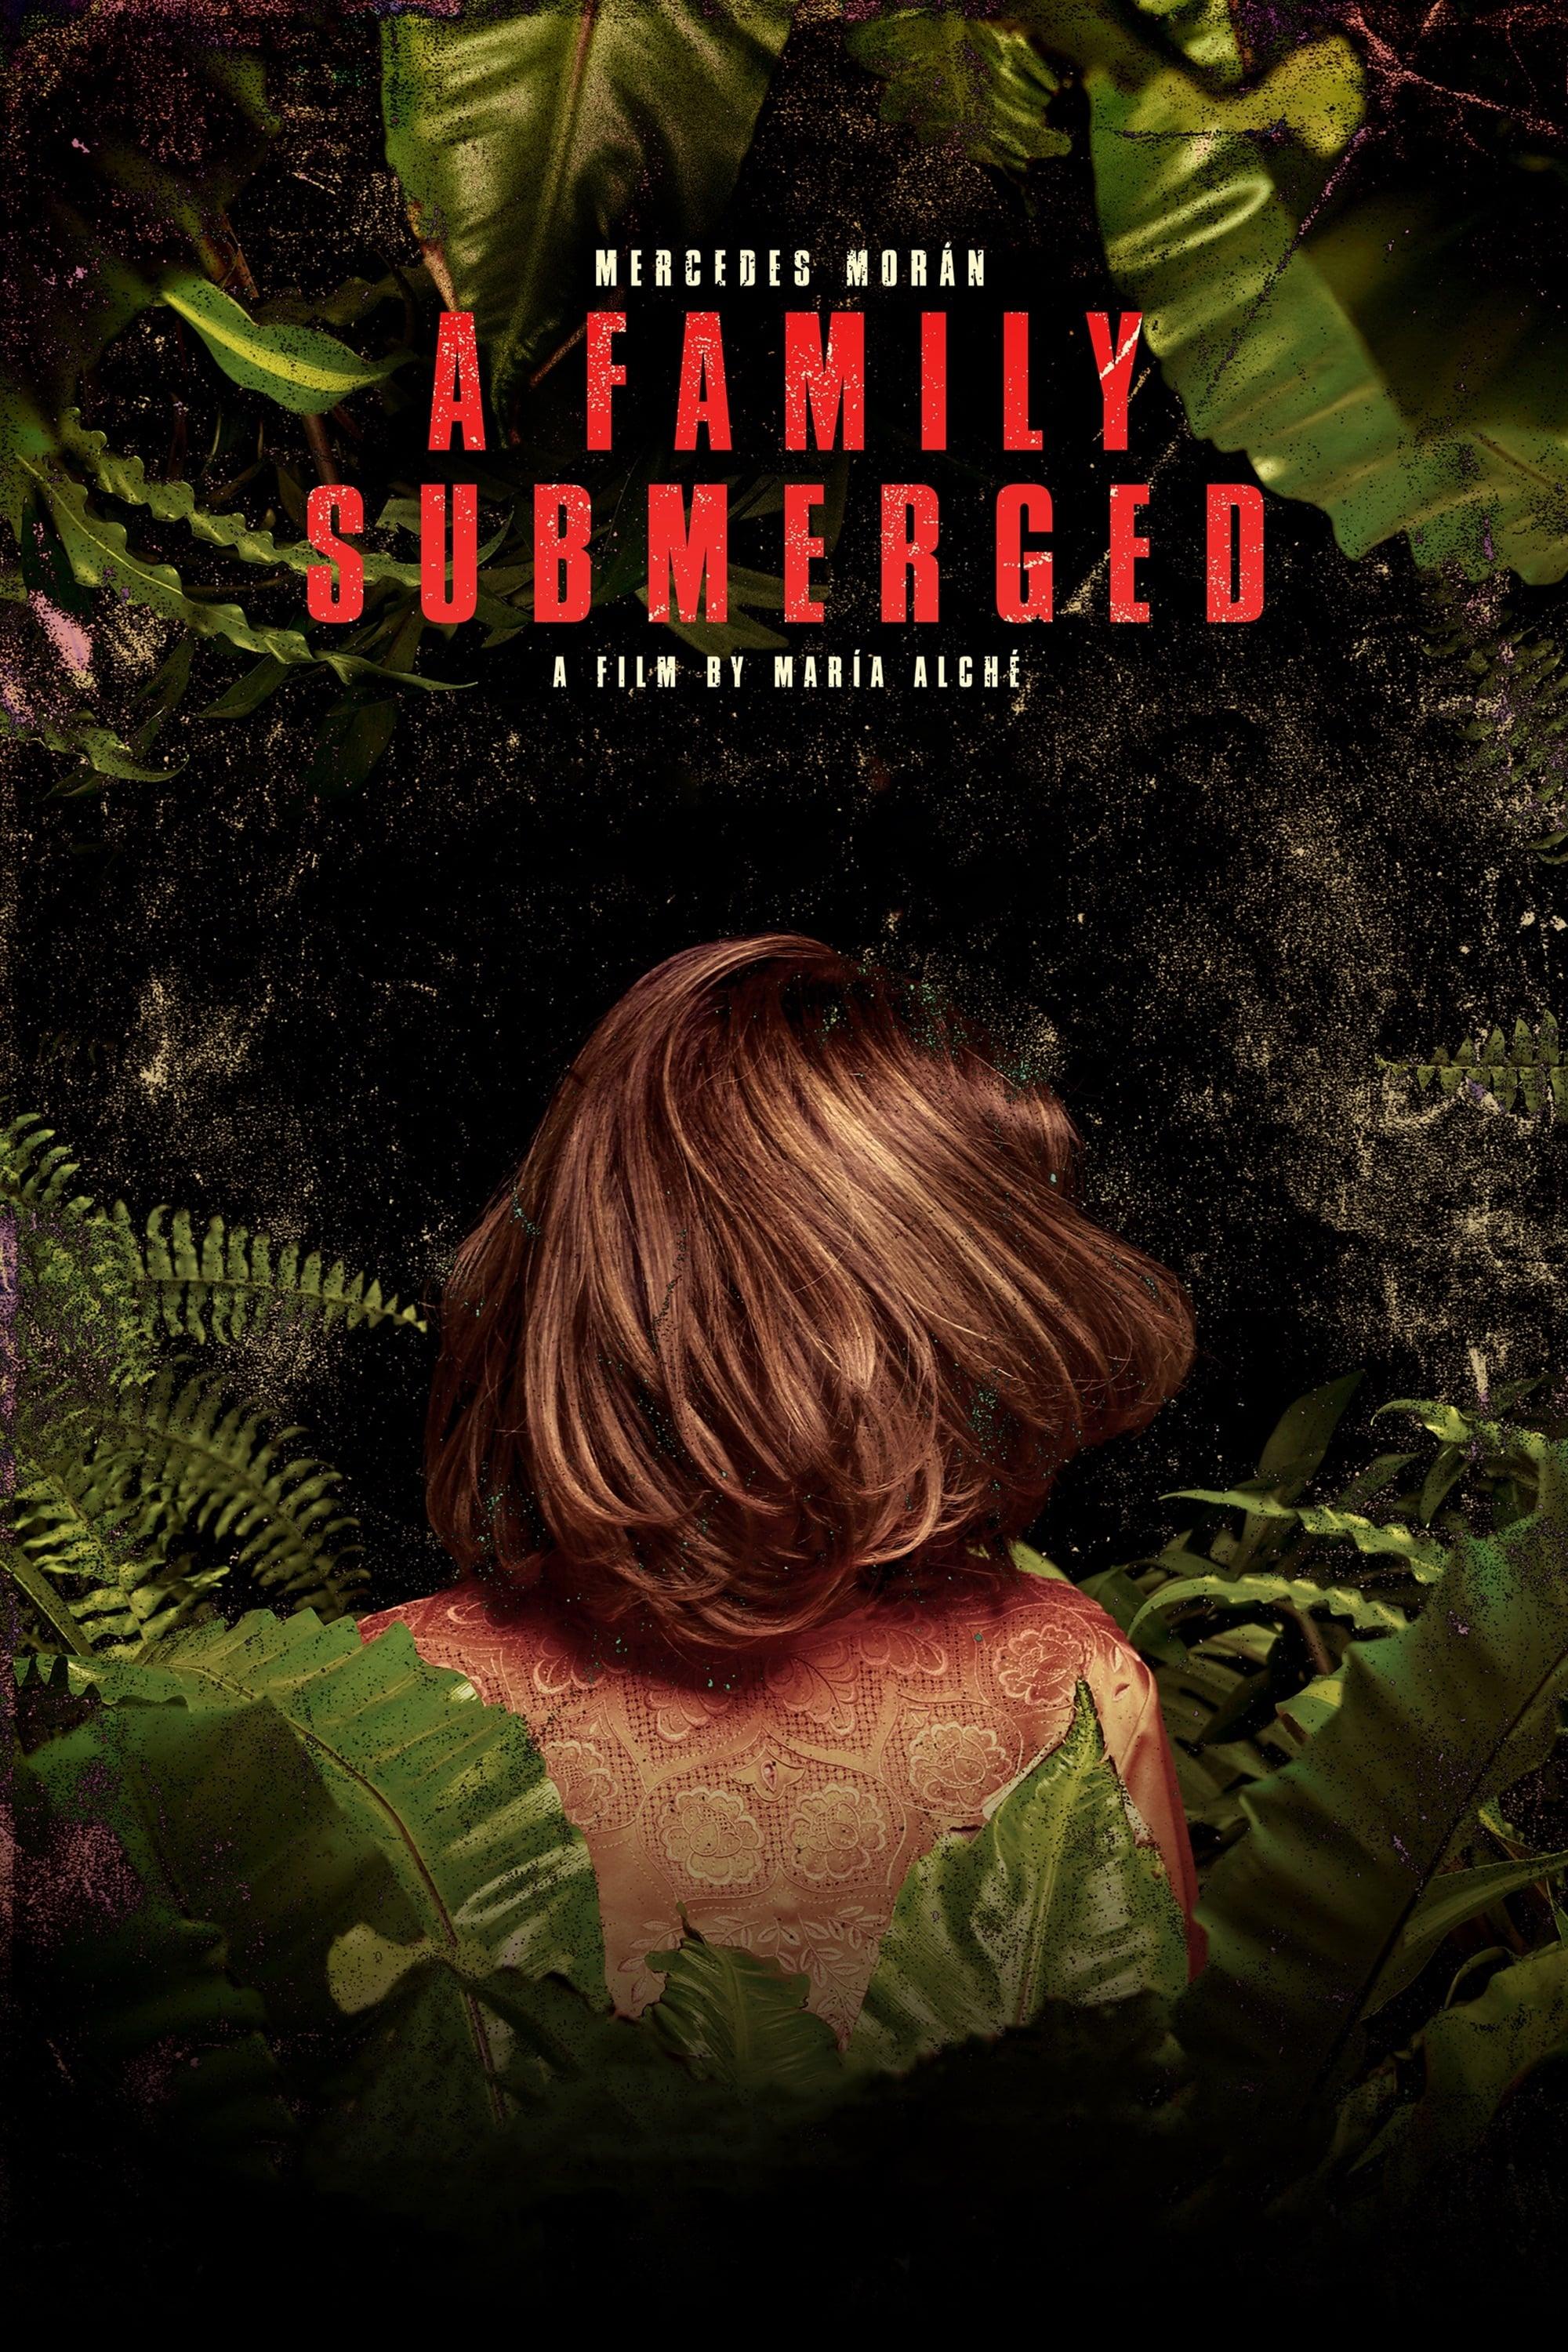 A Family Submerged poster